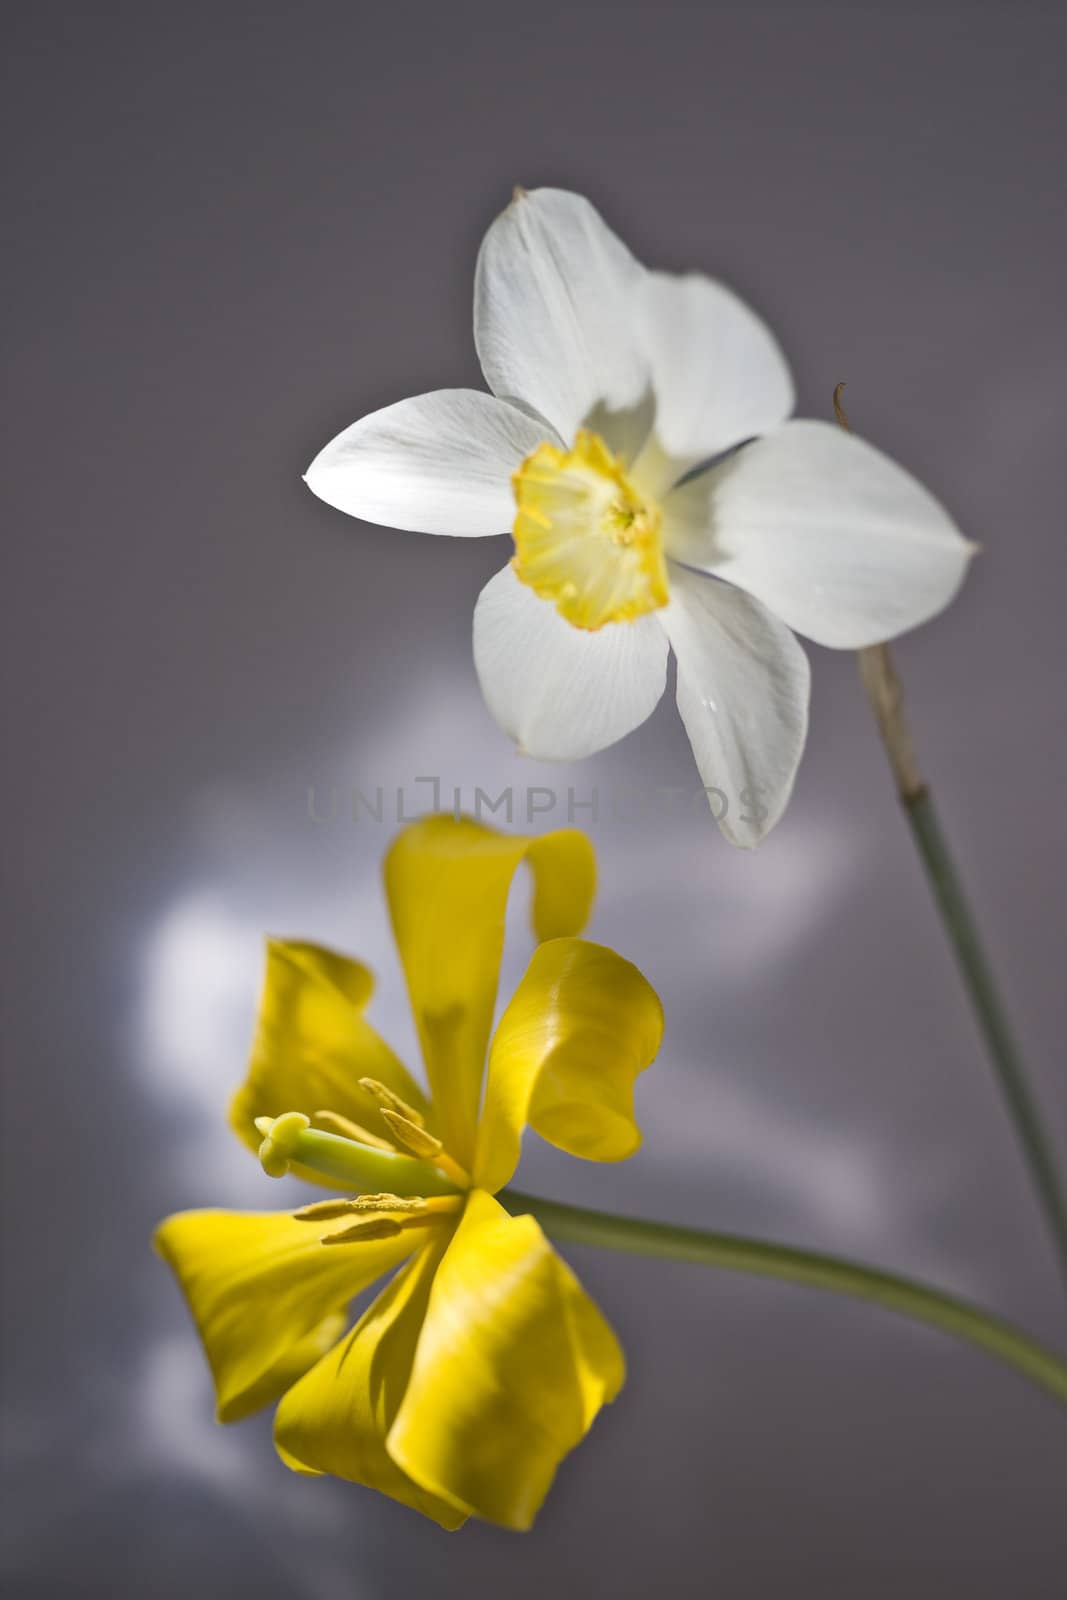 Yellow tulip in focus and white narcissus 